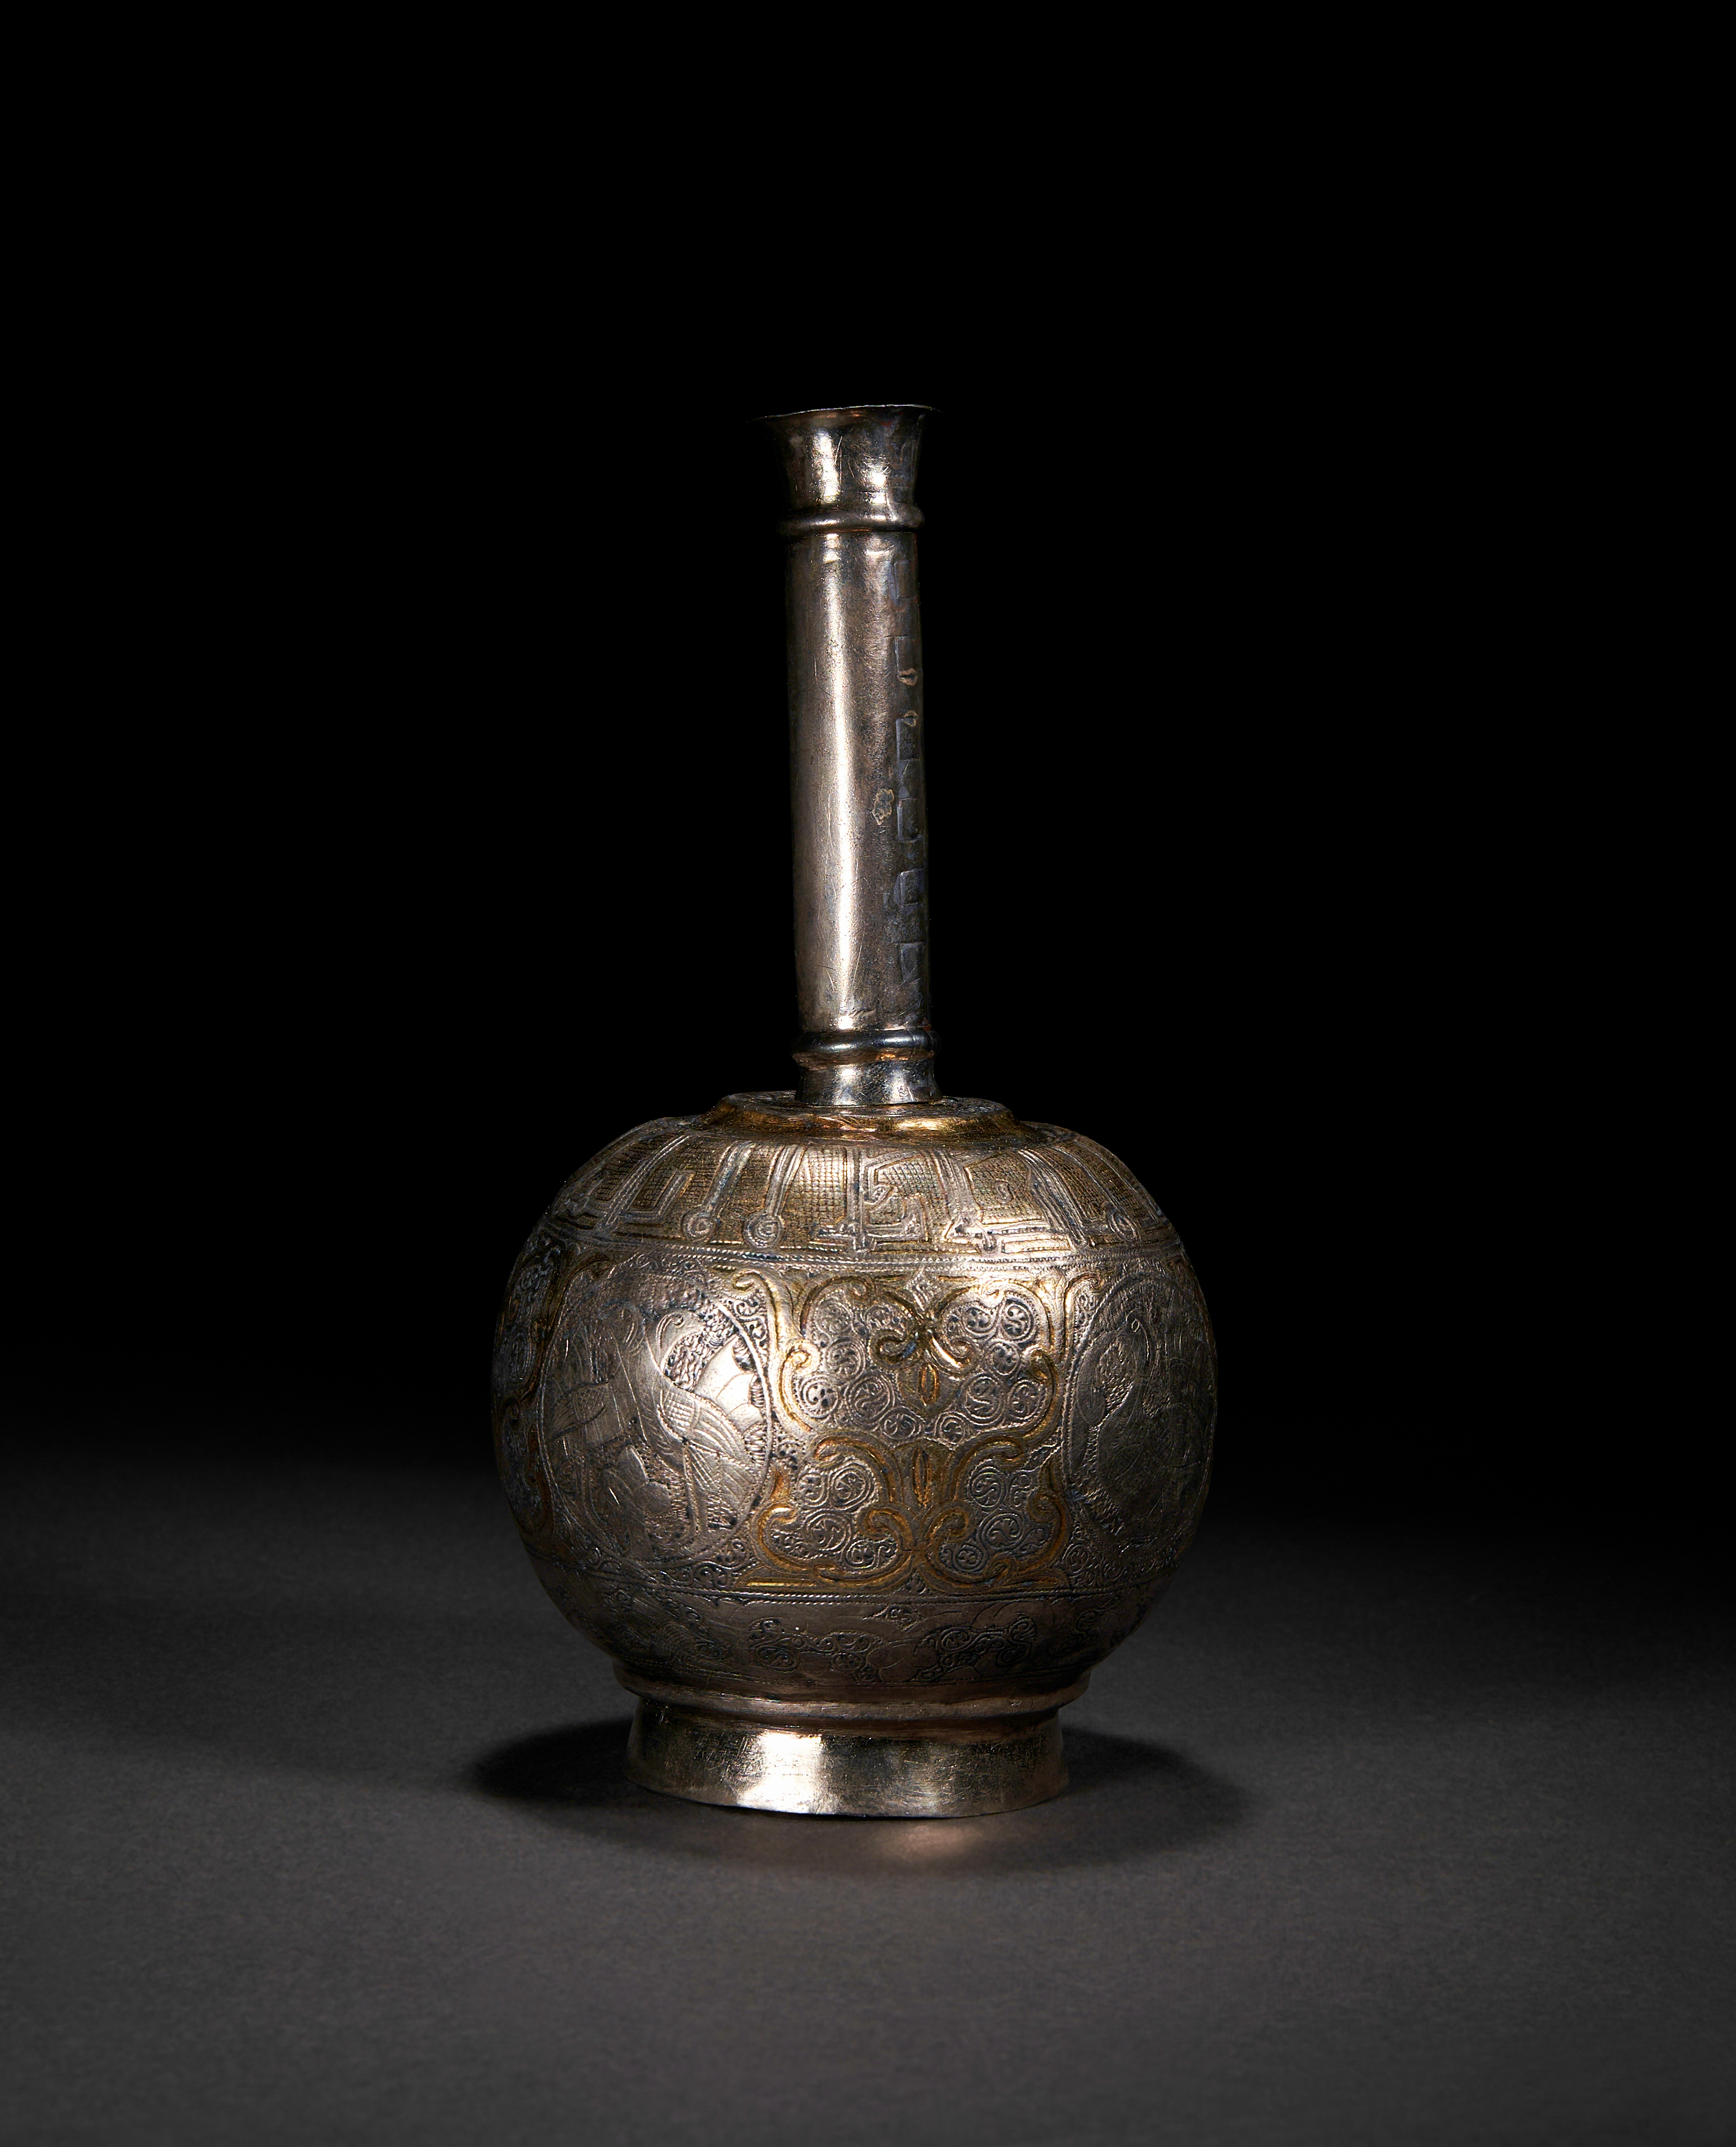 AN EARLY FATIMID KUFIC INSCRIBED PARCEL-GILT SILVER ROSEWATER SPRINKLER, EGYPT, 9TH CENTURY